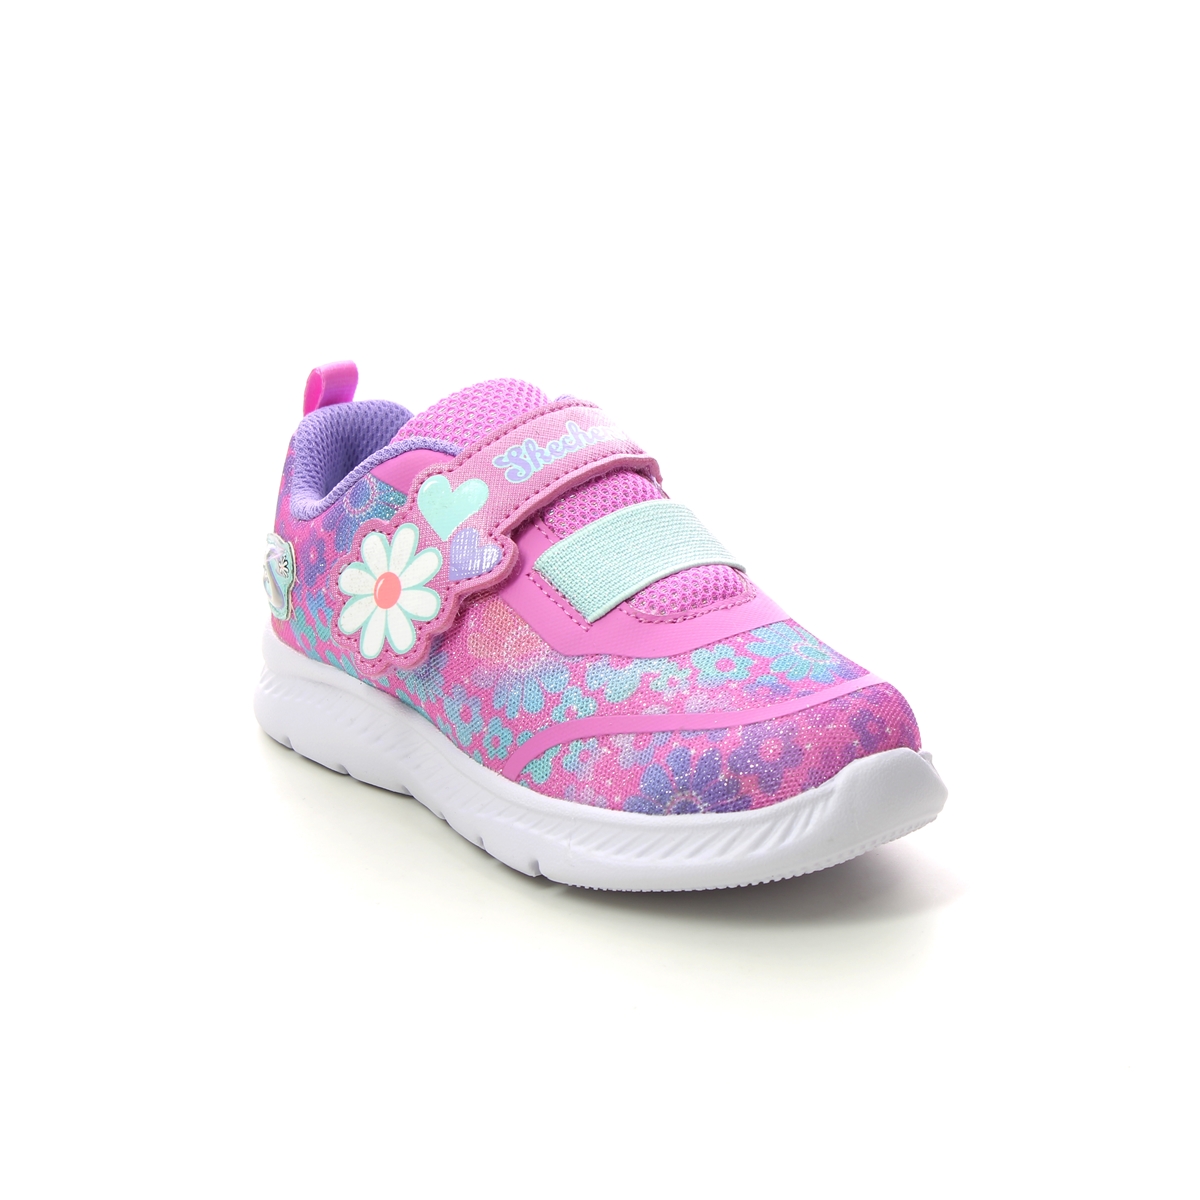 Skechers Comfy Flex 2.0 Pink Kids Girls Trainers 302717N In Size 25 In Plain Pink For kids